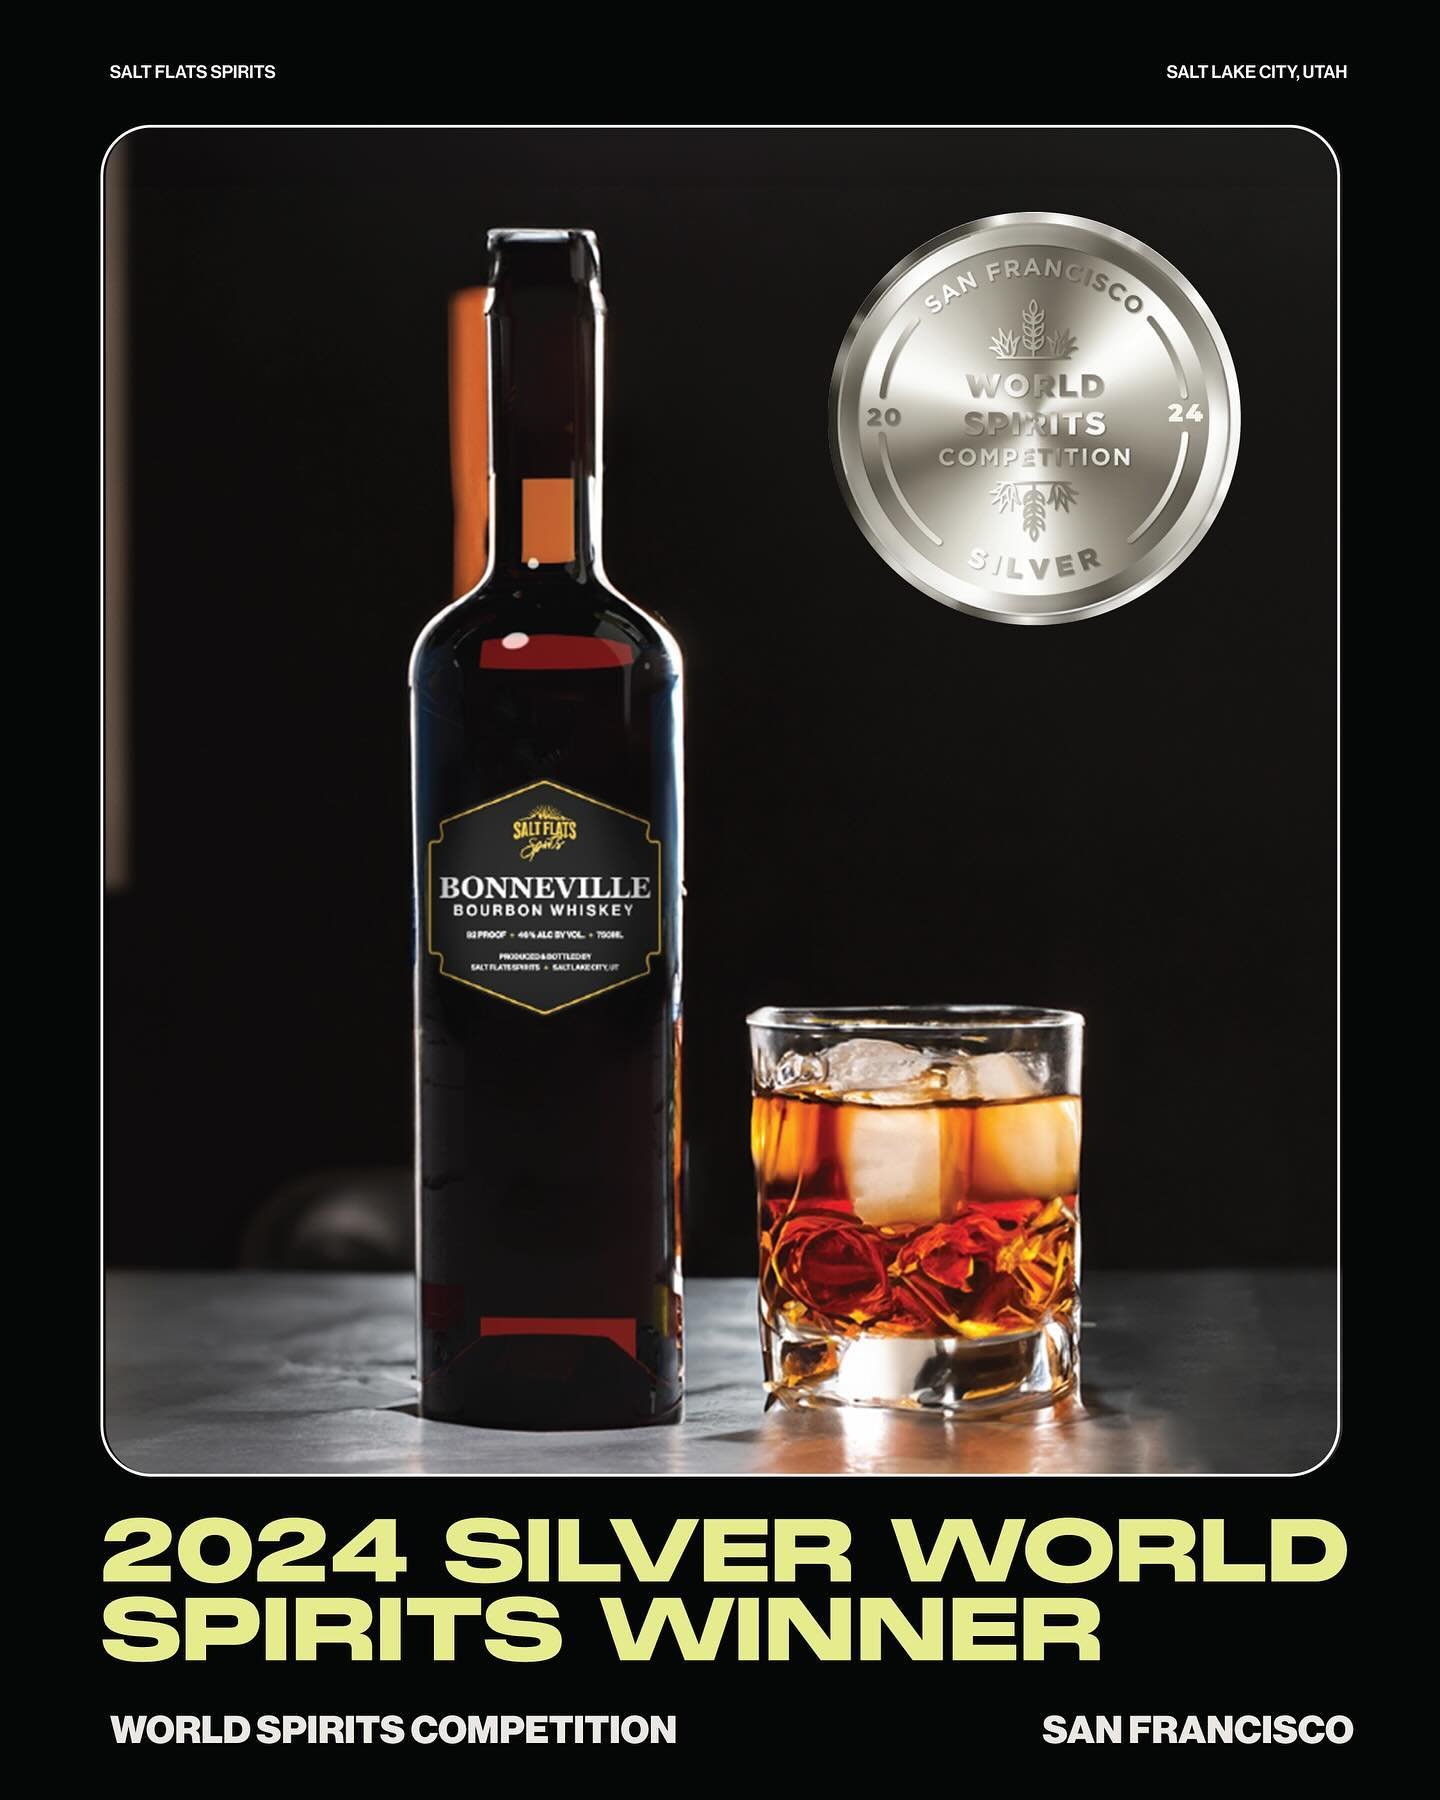 We are extremely proud to announce that our Bonneville Bourbon has been awarded Silver at the San Francisco World Spirits Competition 🥃 It&rsquo;s our honor to be recognized among the finest in the industry 🙌🏻
.
.
.
.
#saltflatsspirits #silver #bo